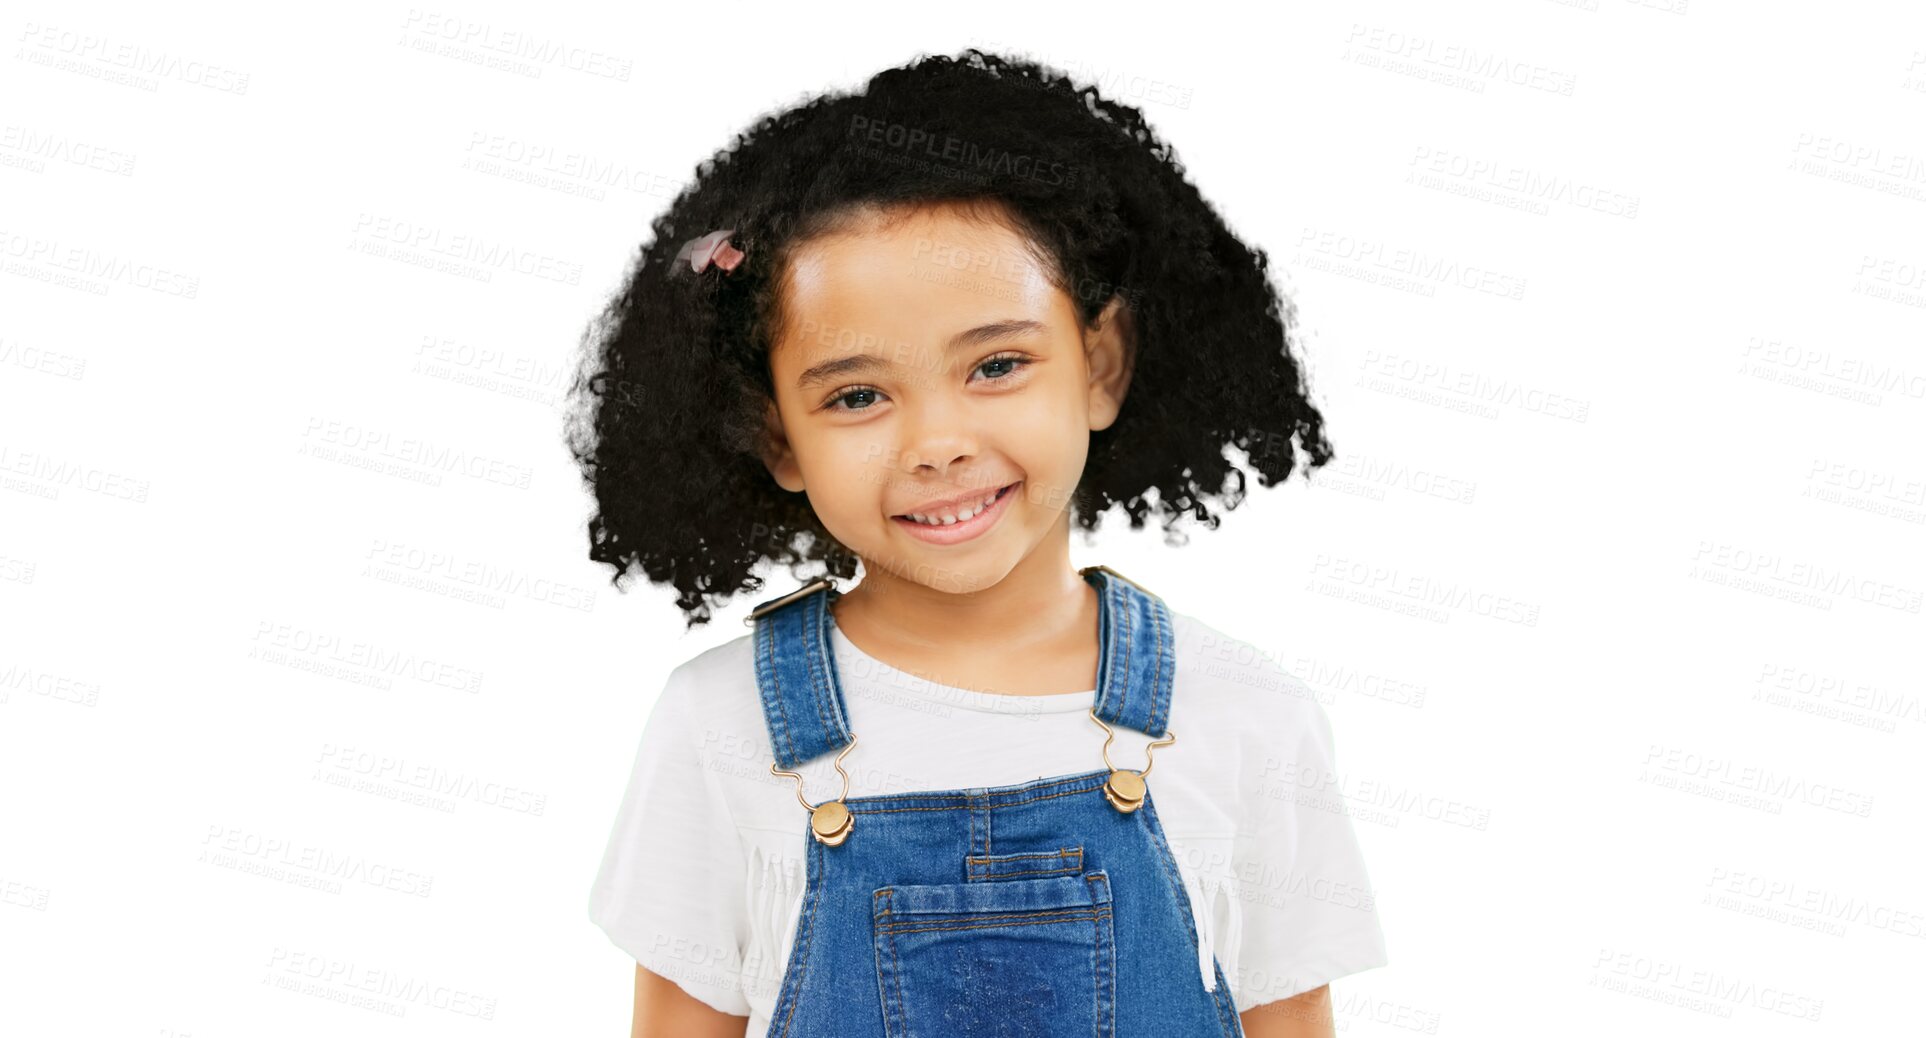 Buy stock photo Happy, young and portrait of child with smile on isolated, png and transparent background. Kindergarten, fashion and face of kid with cute outfit for childhood, happiness and style in South Africa